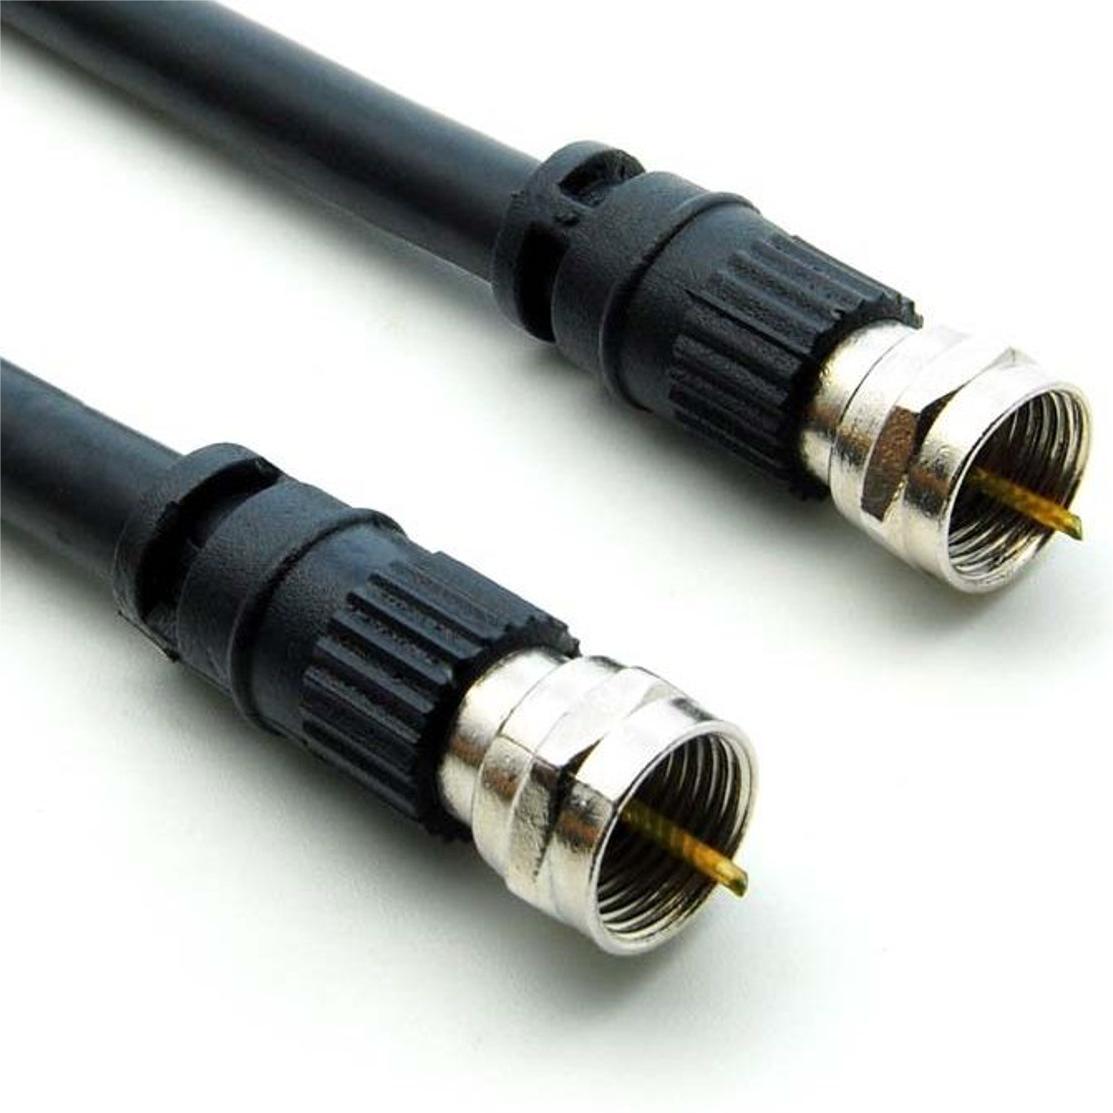 Aston Cable - RG6 Coaxial Cable with F & PAL Connectors for High-quality Signal Transmission